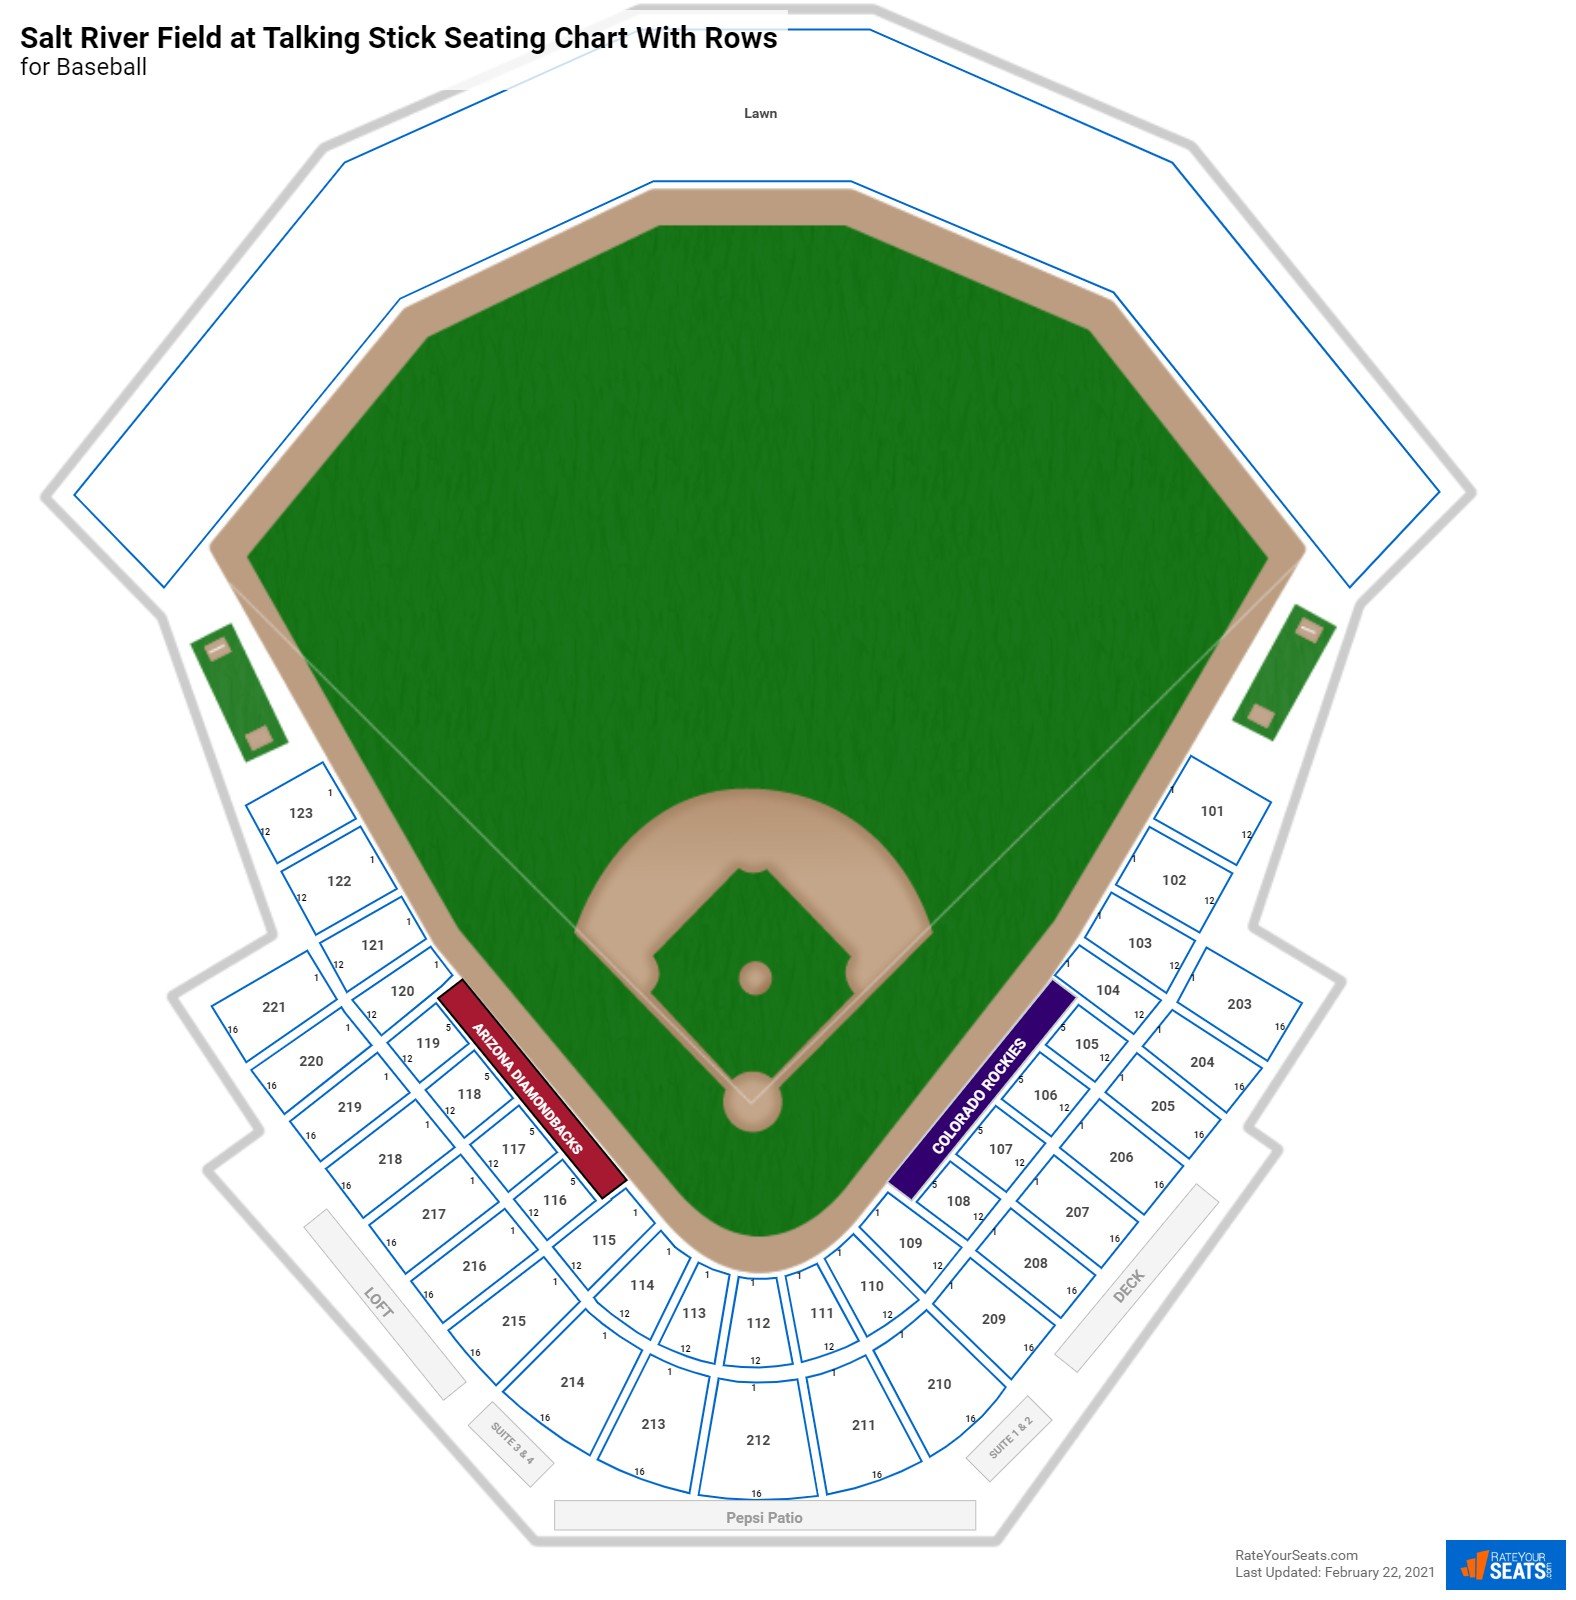 Salt River Field at Talking Stick seating chart with row numbers